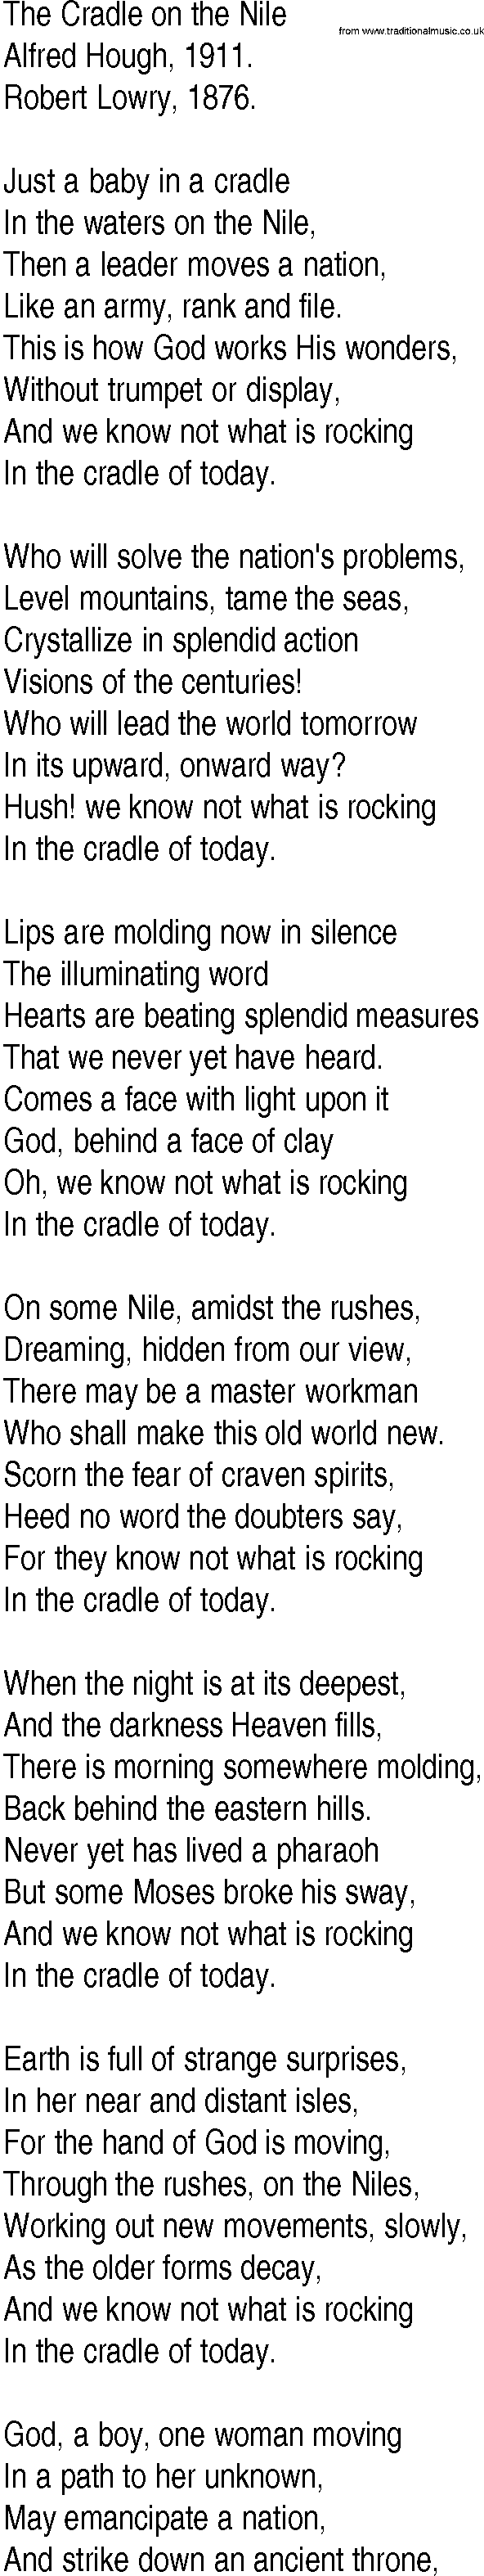 Hymn and Gospel Song: The Cradle on the Nile by Alfred Hough lyrics